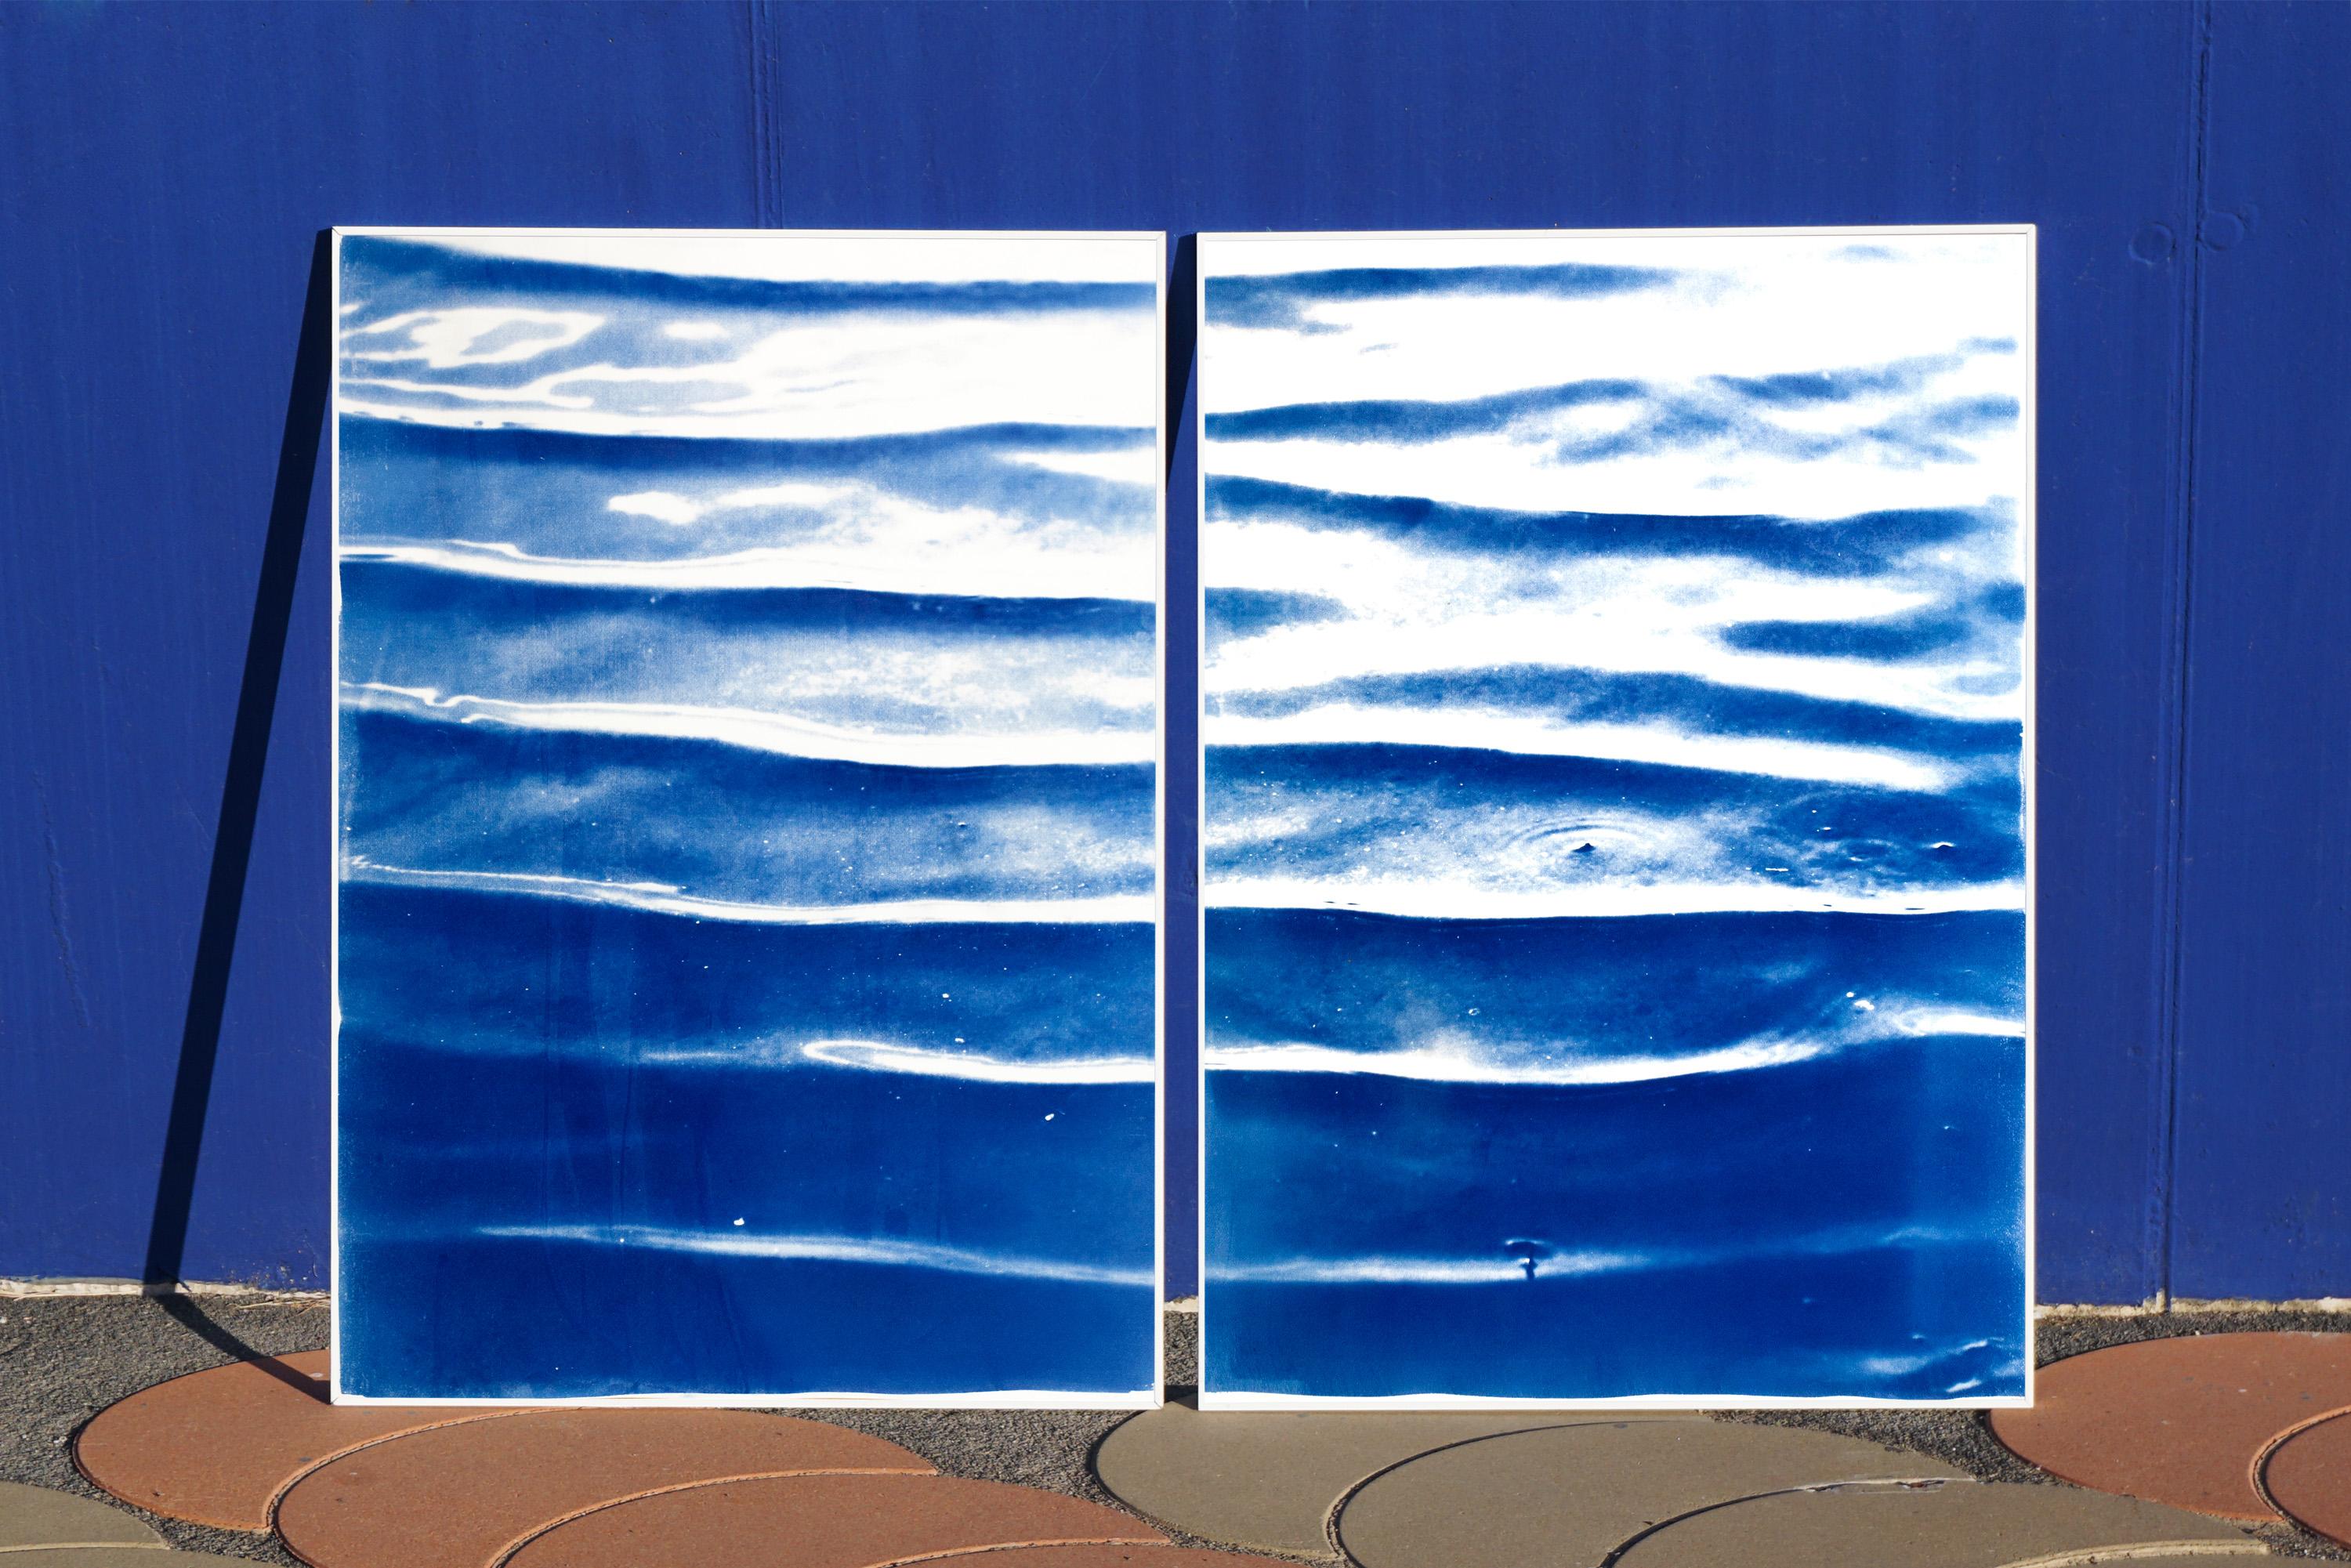 Diptych, Japanese Zen Pond Ripples, Feng Shui Cyanotype, Water  - Blue Color Photograph by Kind of Cyan